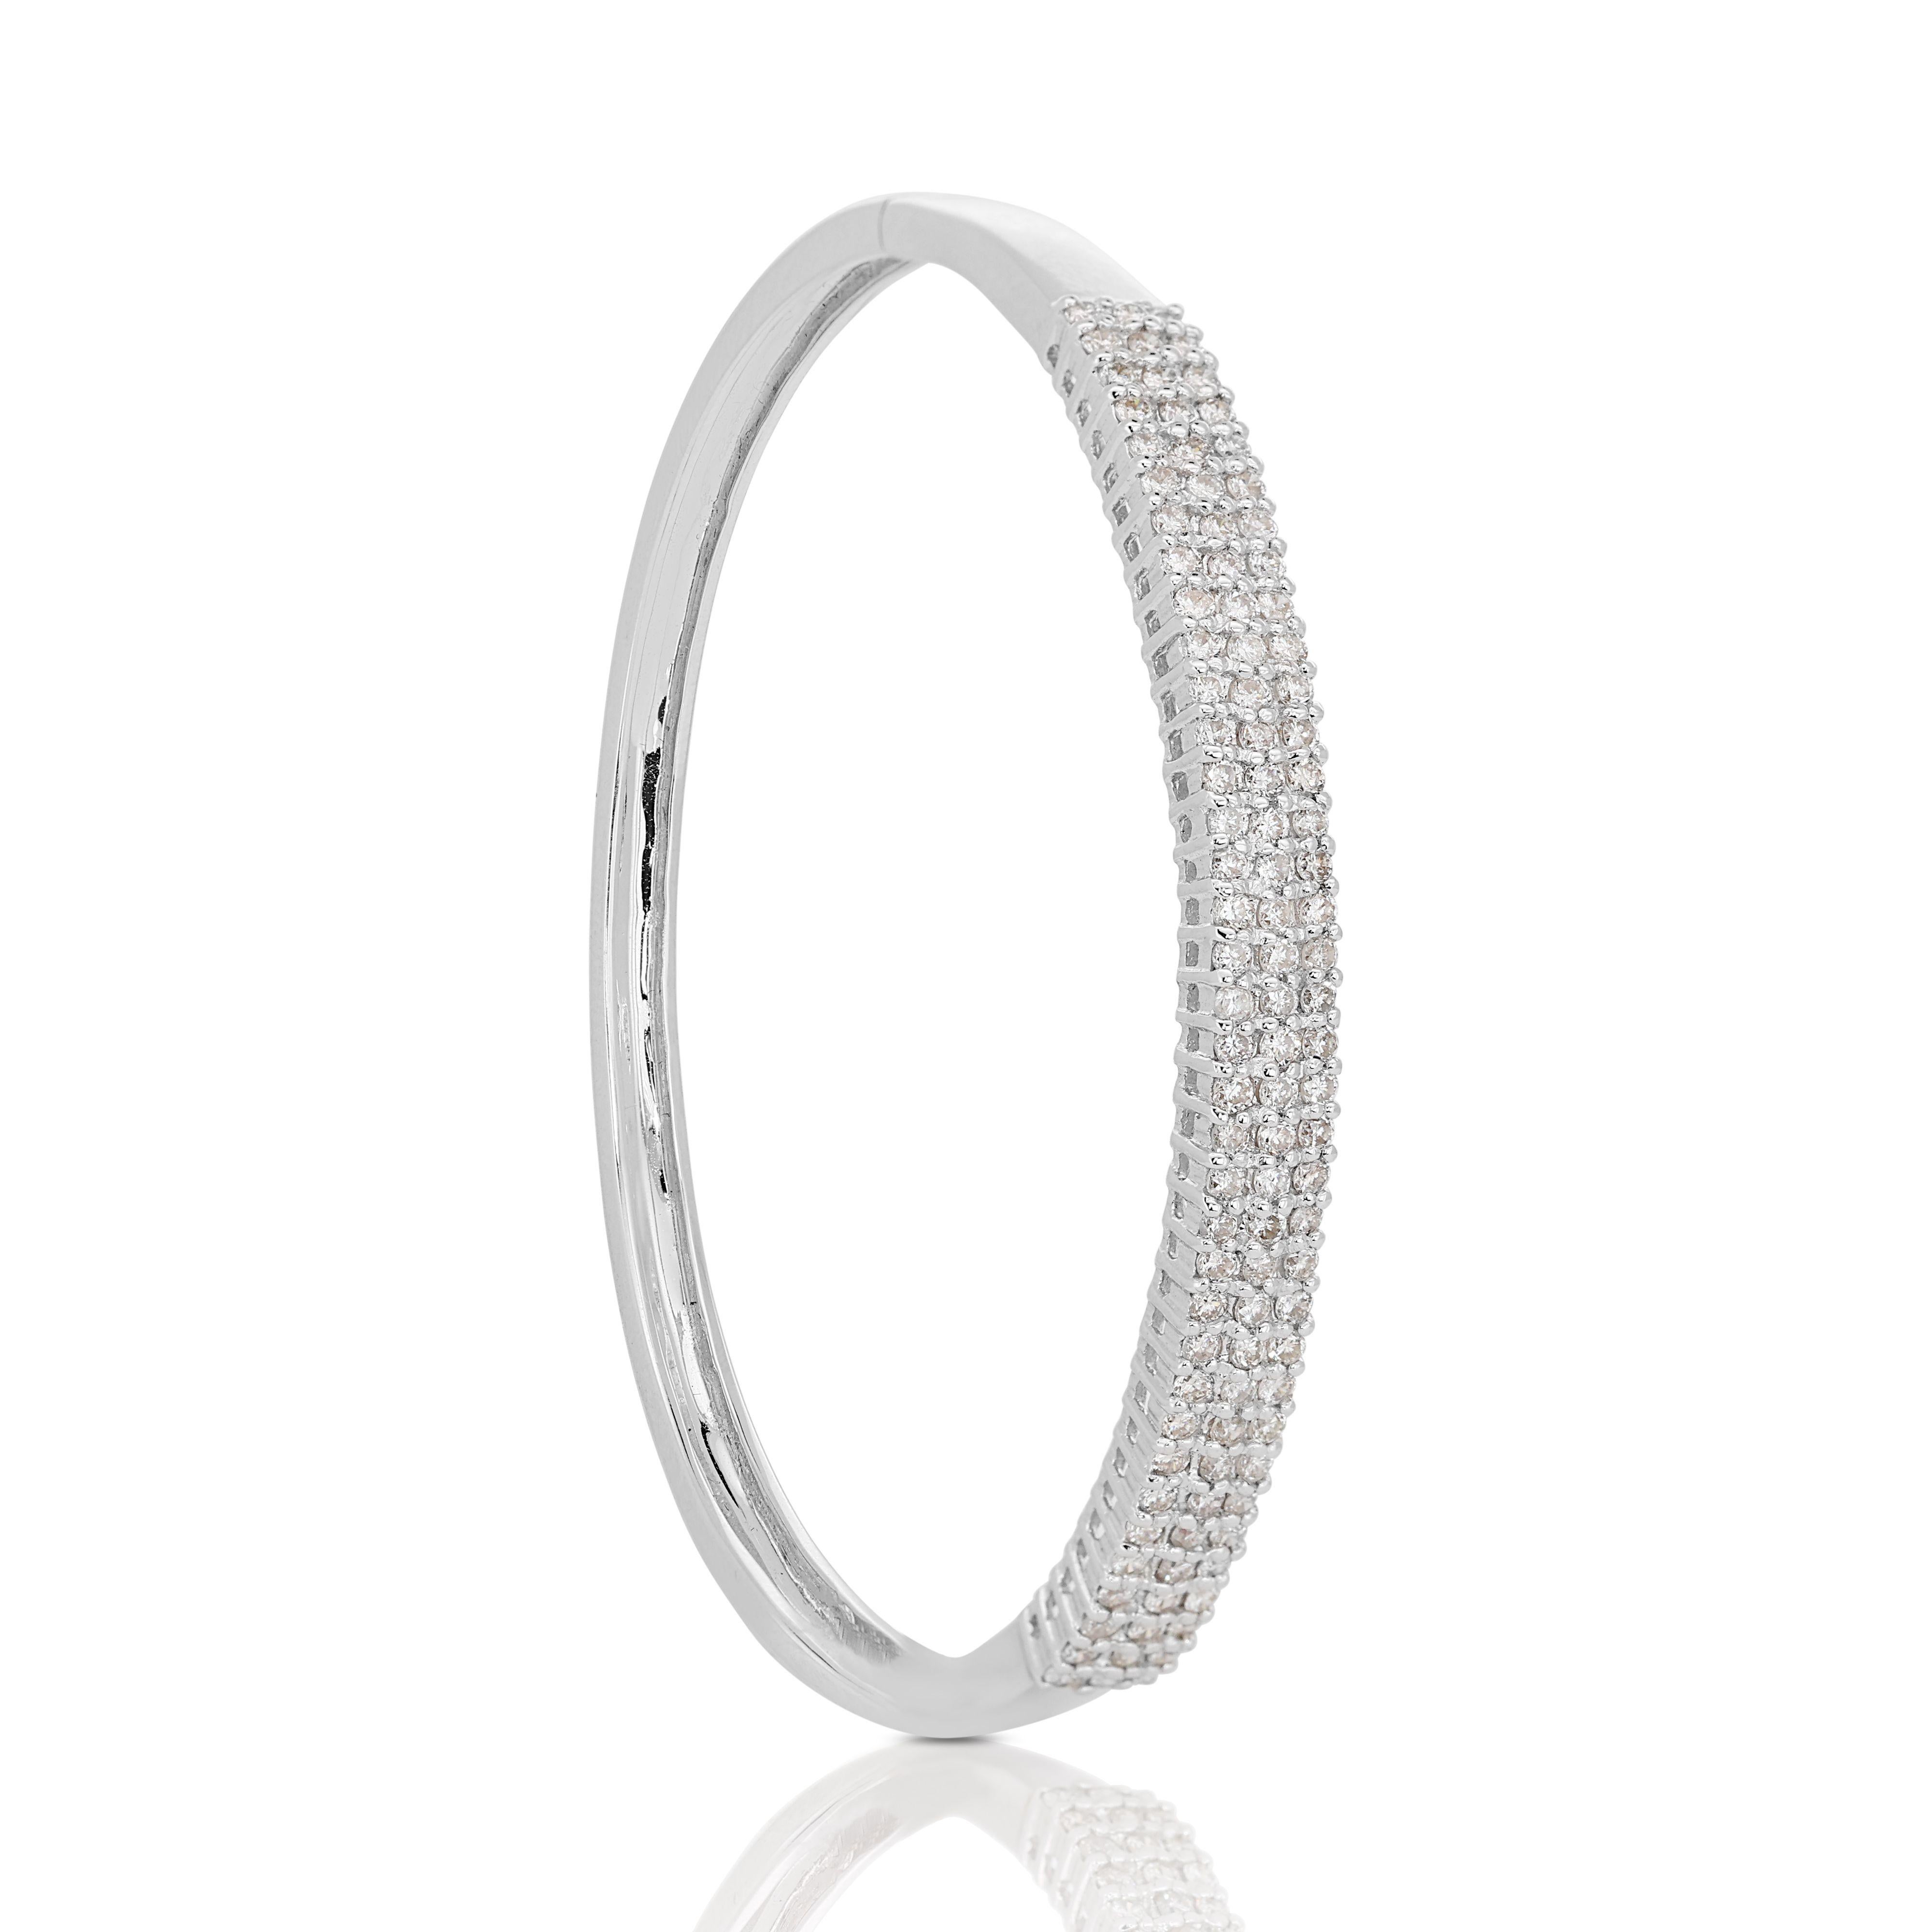 Stunning 1.08ct Round Brilliant Natural Diamond Bangle in 18K White Gold For Sale 3